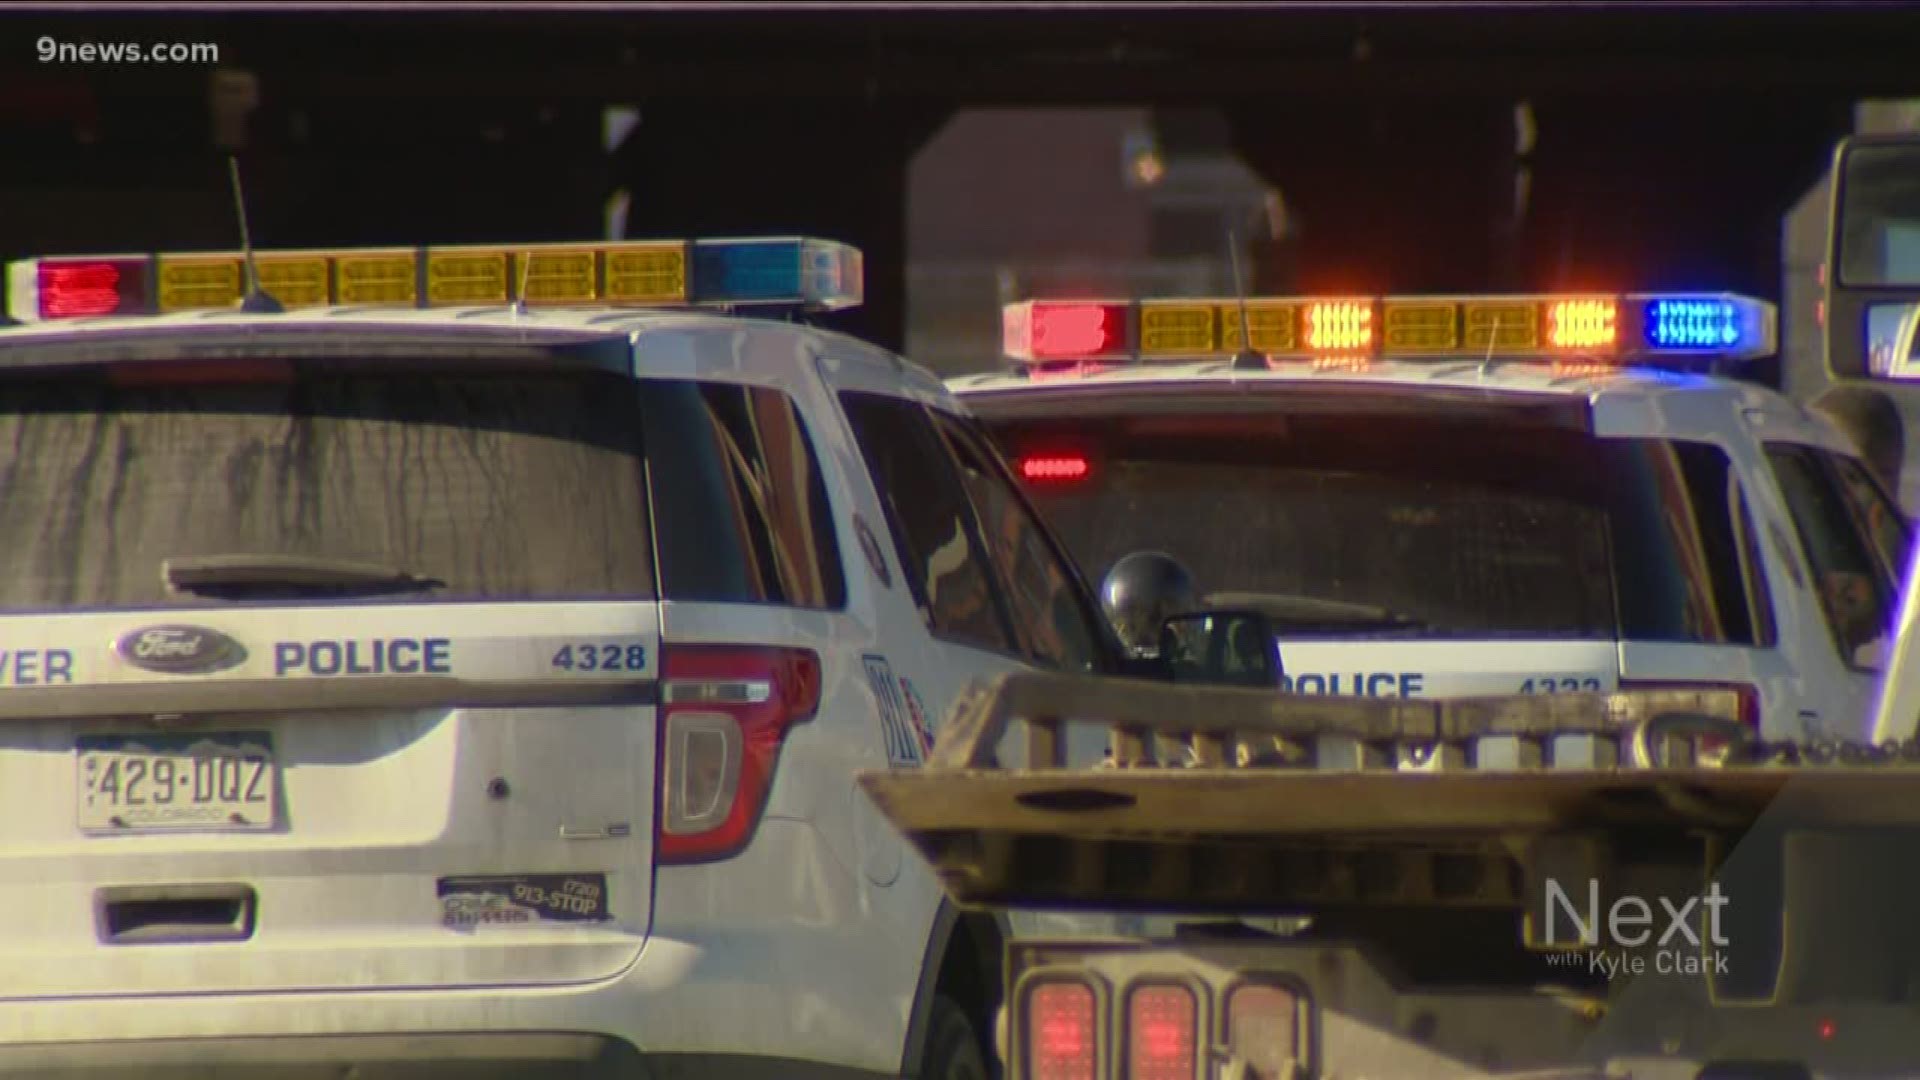 At least two vehicles in a parking garage were damaged by bullets, according to Denver Police.